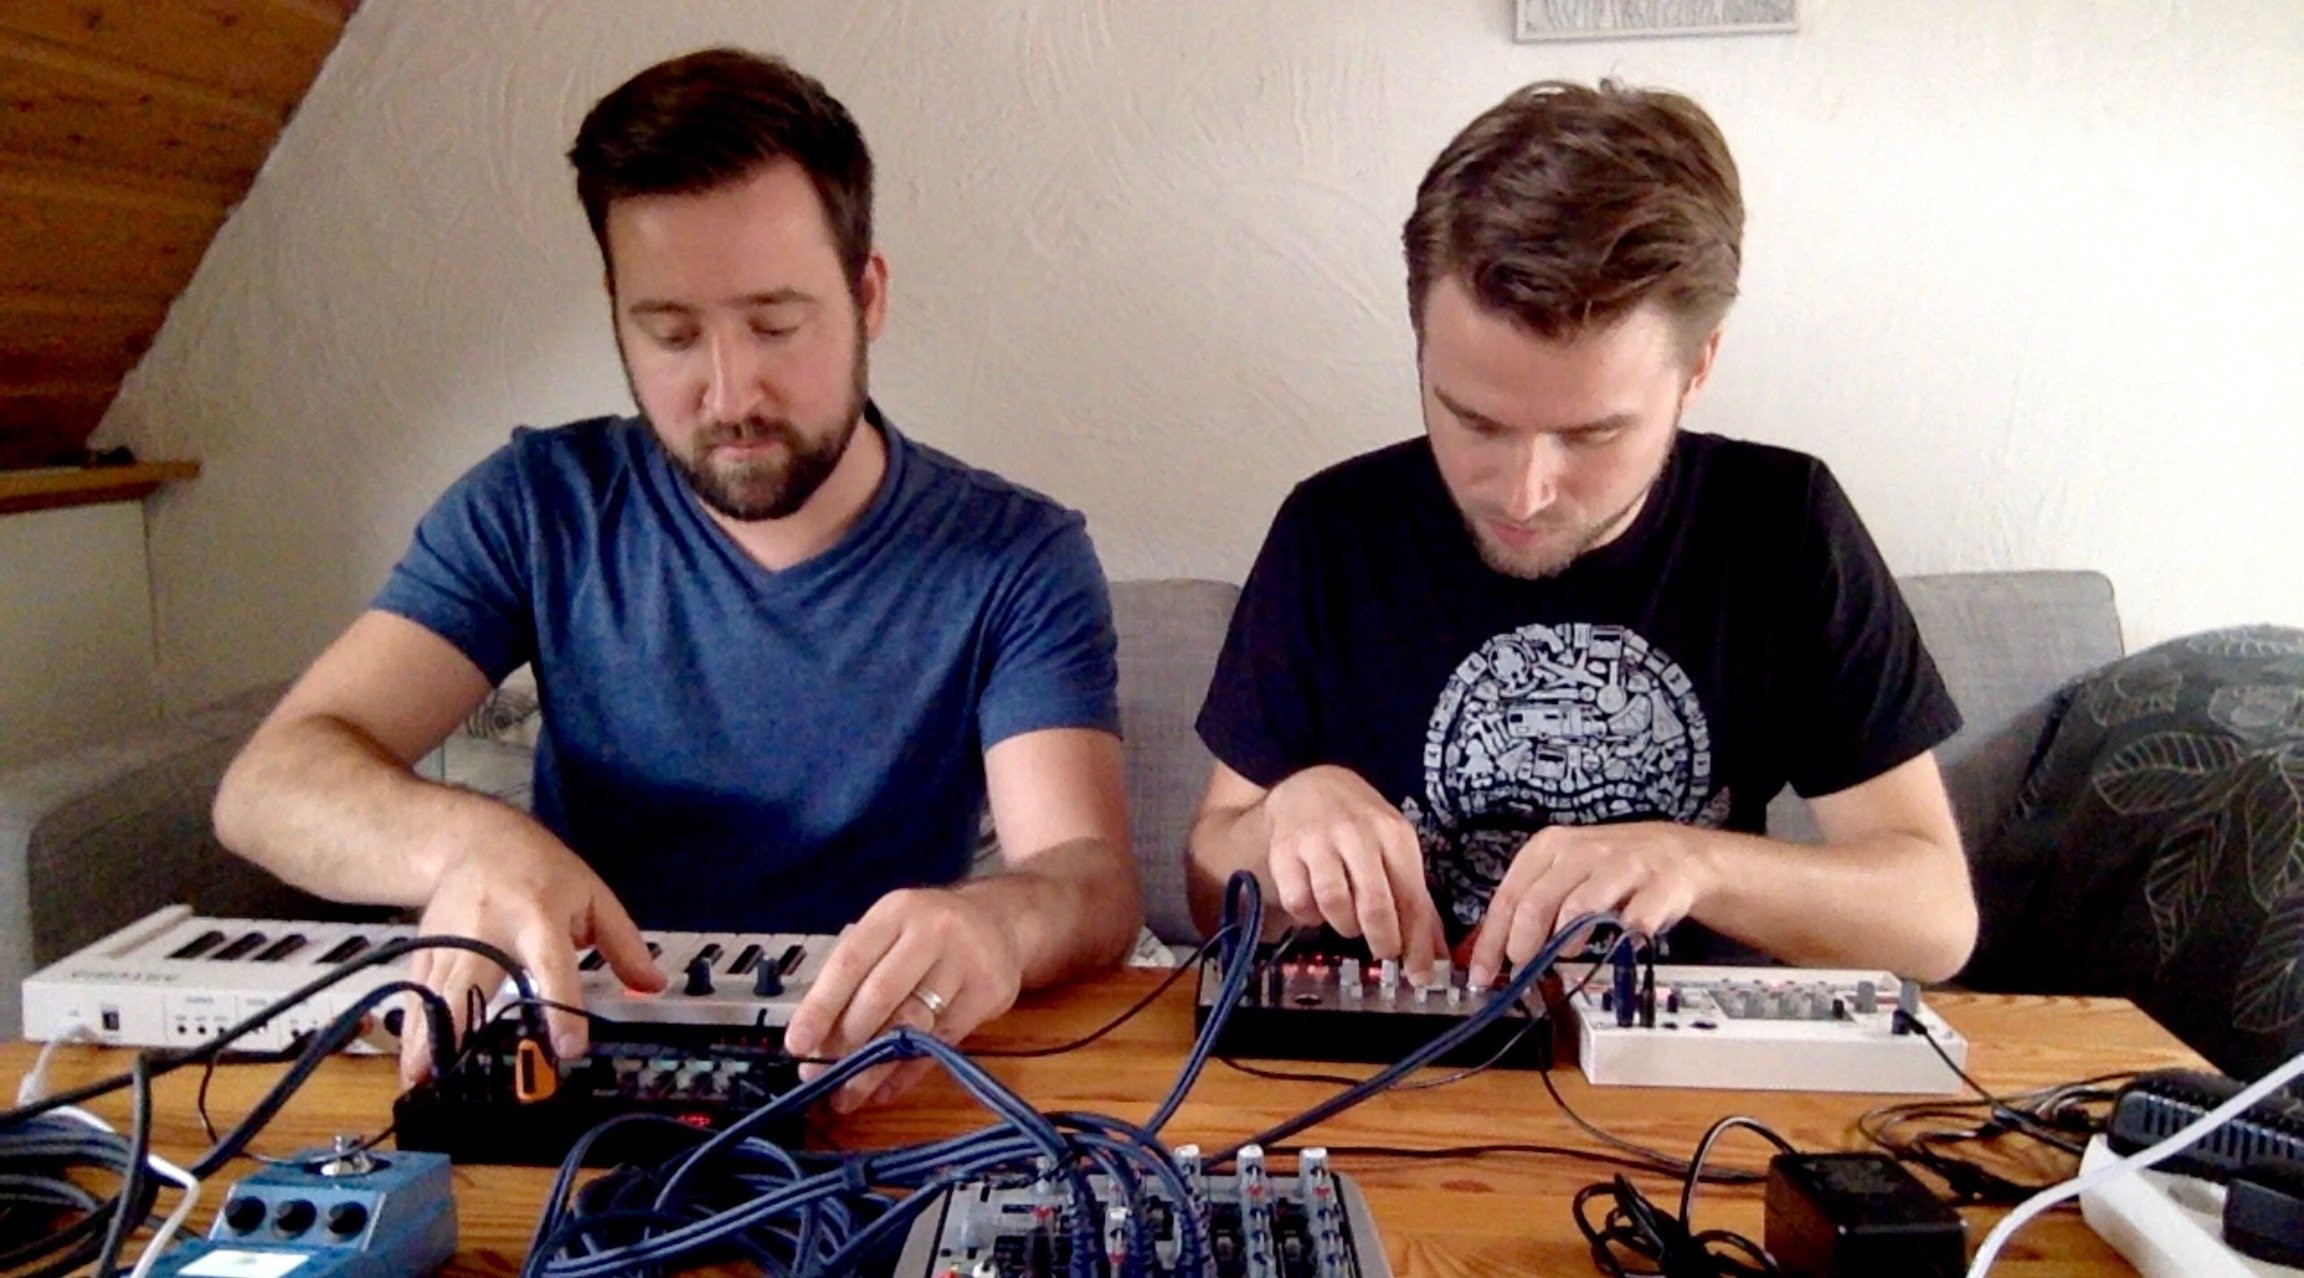 Improvised electronic music by Joep Slenter & Abel de Beer. We mainly use Korg Volcas. Check our YouTube channel for full-length videos.